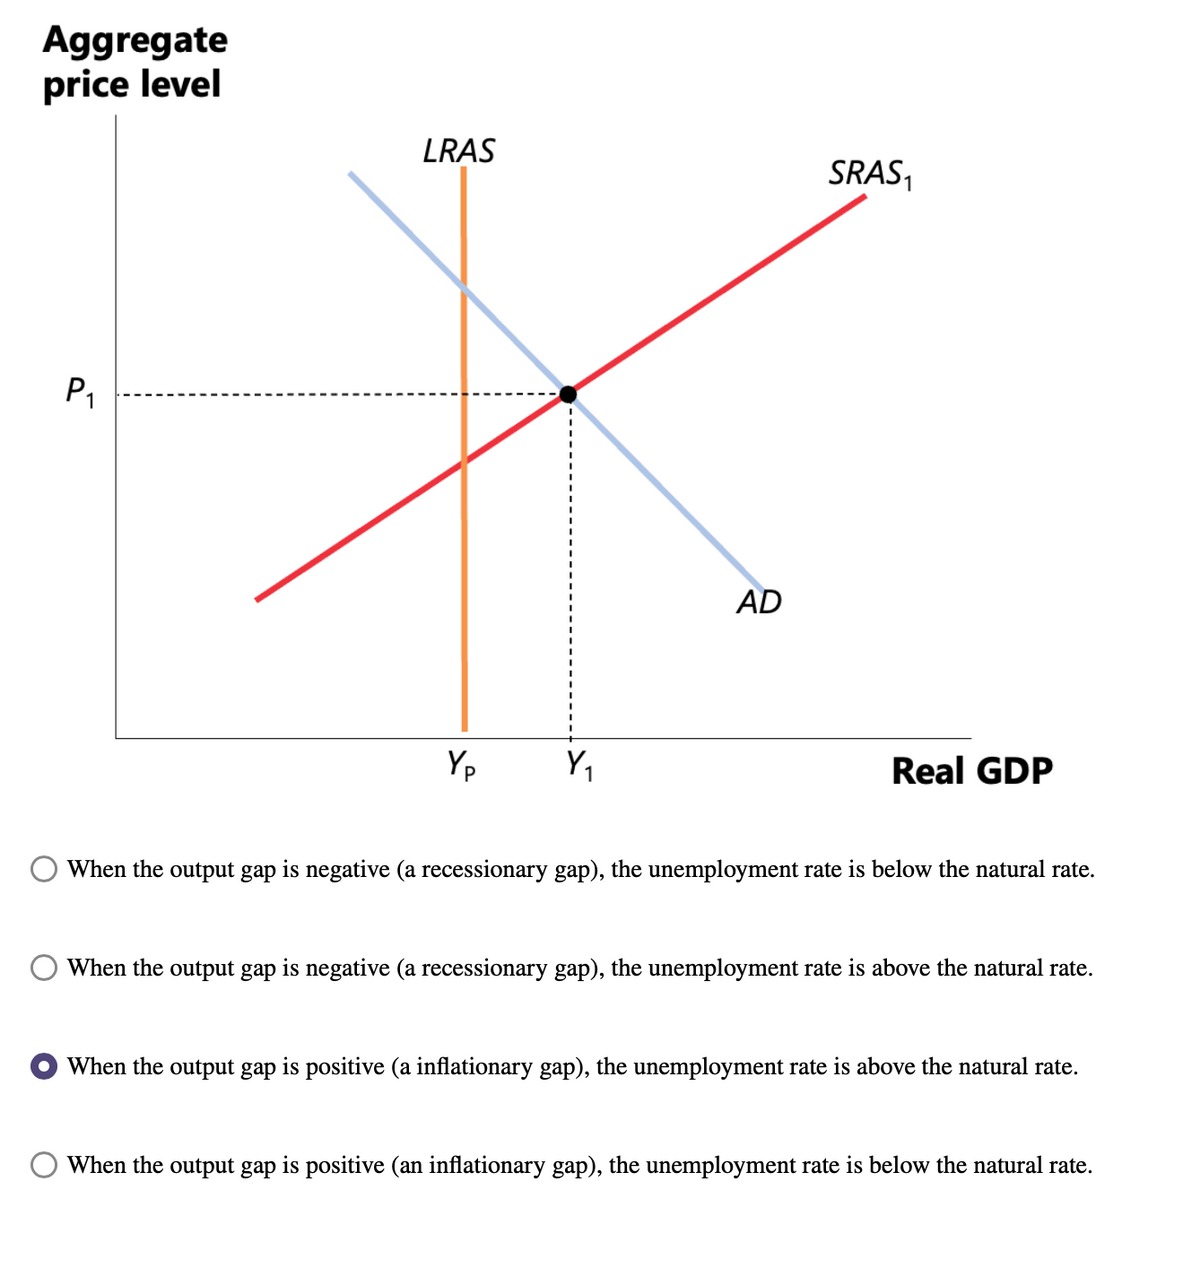 Aggregate
price level
LRAS
SRAS,
P,
AD
Yp
Y,
Real GDP
When the output gap is negative (a recessionary gap), the unemployment rate is below the natural rate.
When the output gap is negative (a recessionary gap), the unemployment rate is above the natural rate.
When the output gap is positive (a inflationary gap), the unemployment rate is above the natural rate.
When the output gap is positive (an inflationary gap), the unemployment rate is below the natural rate.
